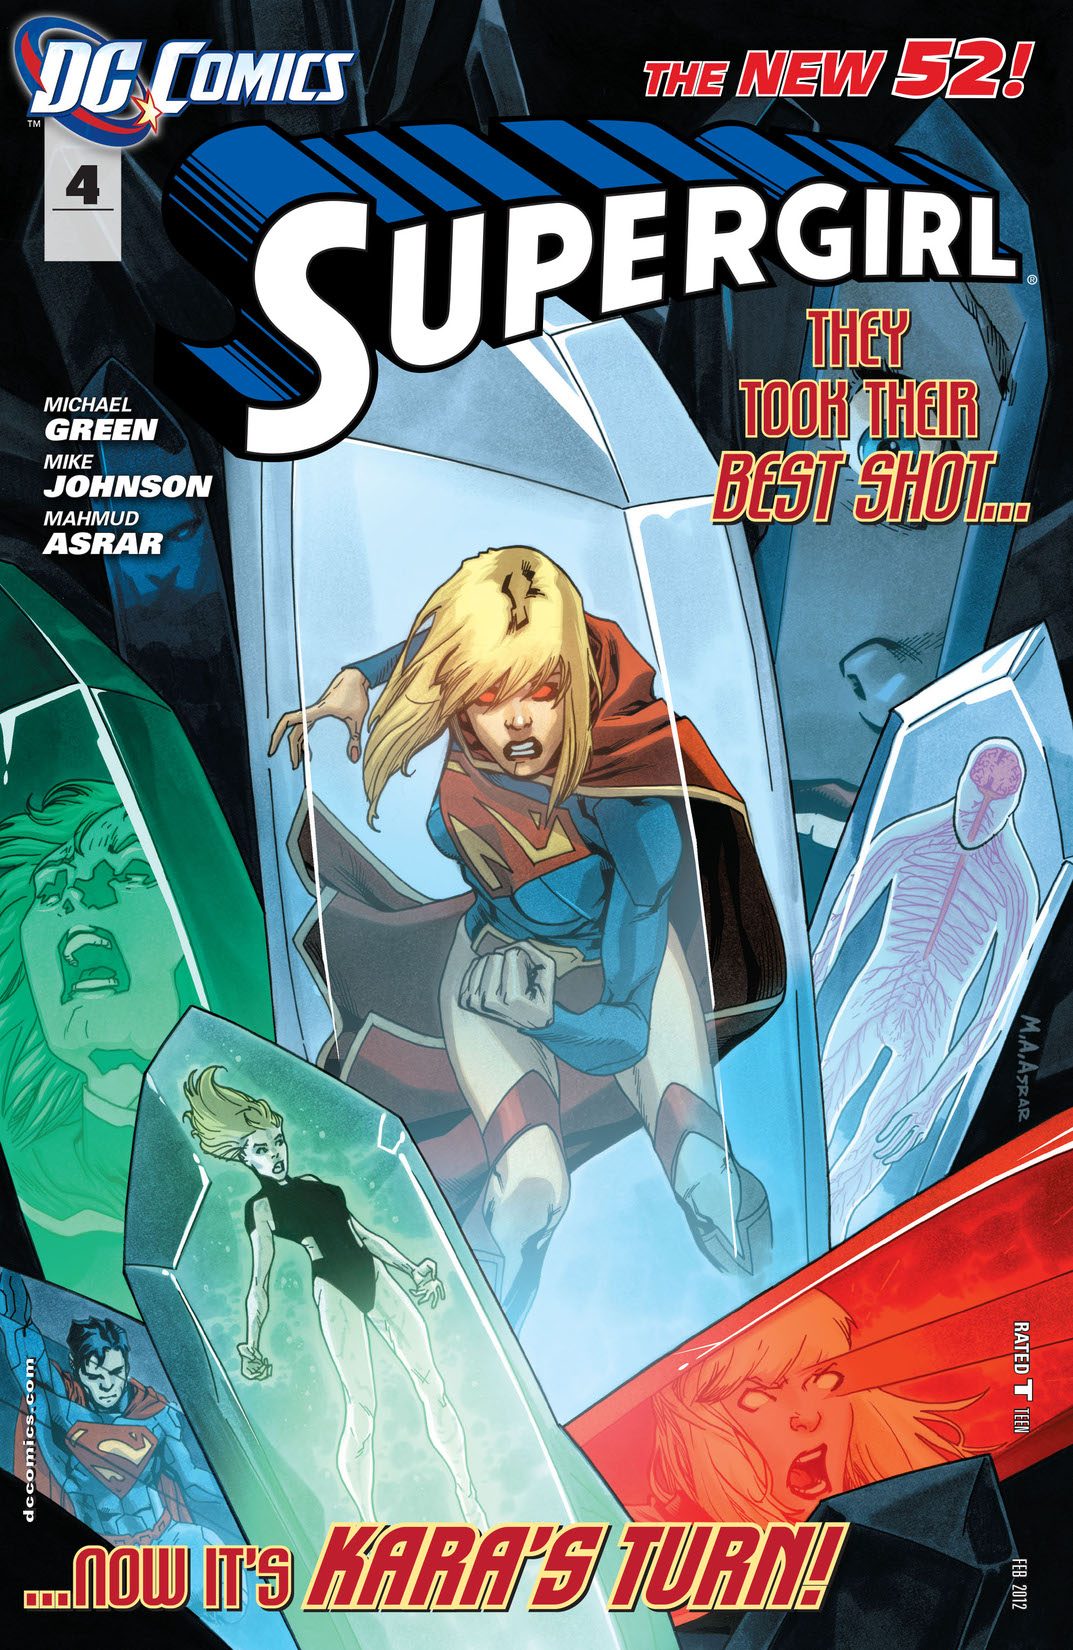 Supergirl (2011-) #4 preview images